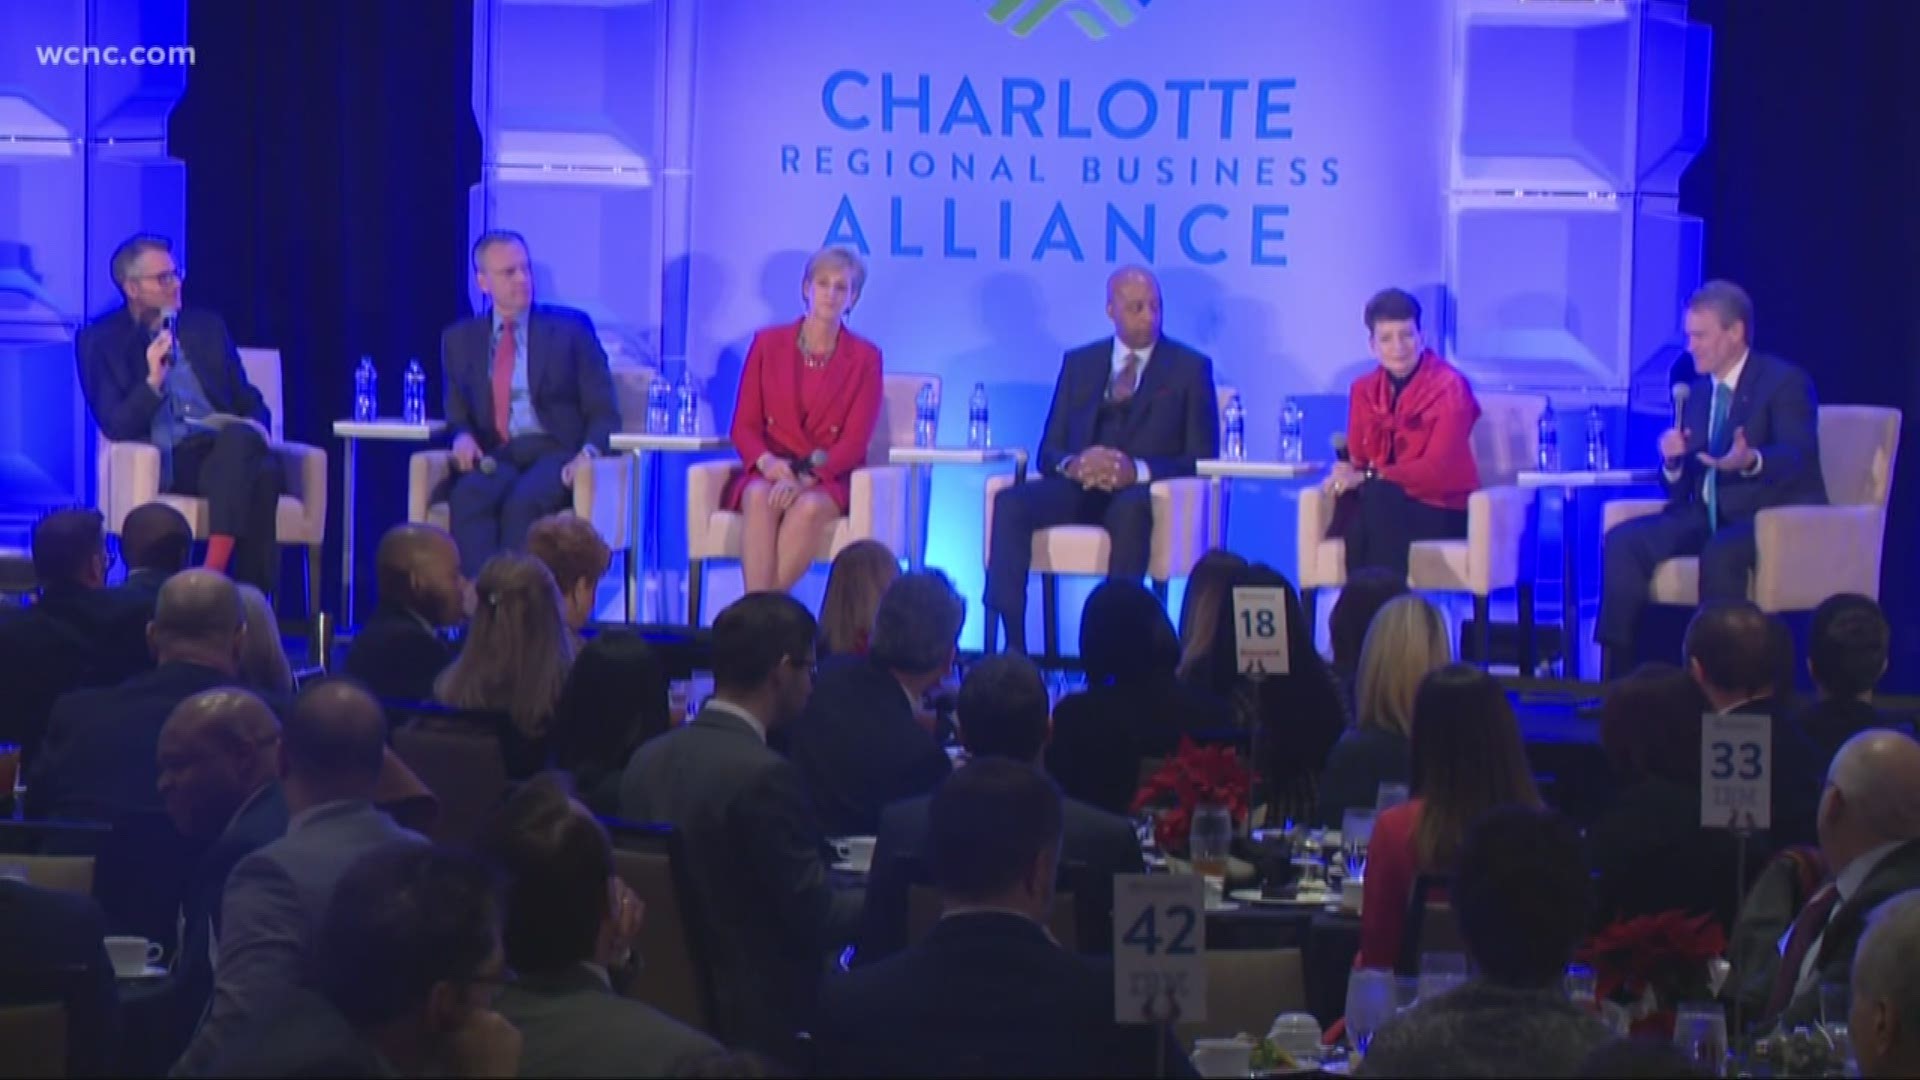 The 2020 election, trade wars, and more topics were discussed at the Charlotte Regional Business Alliance 2019 Economic Outlook Conference.